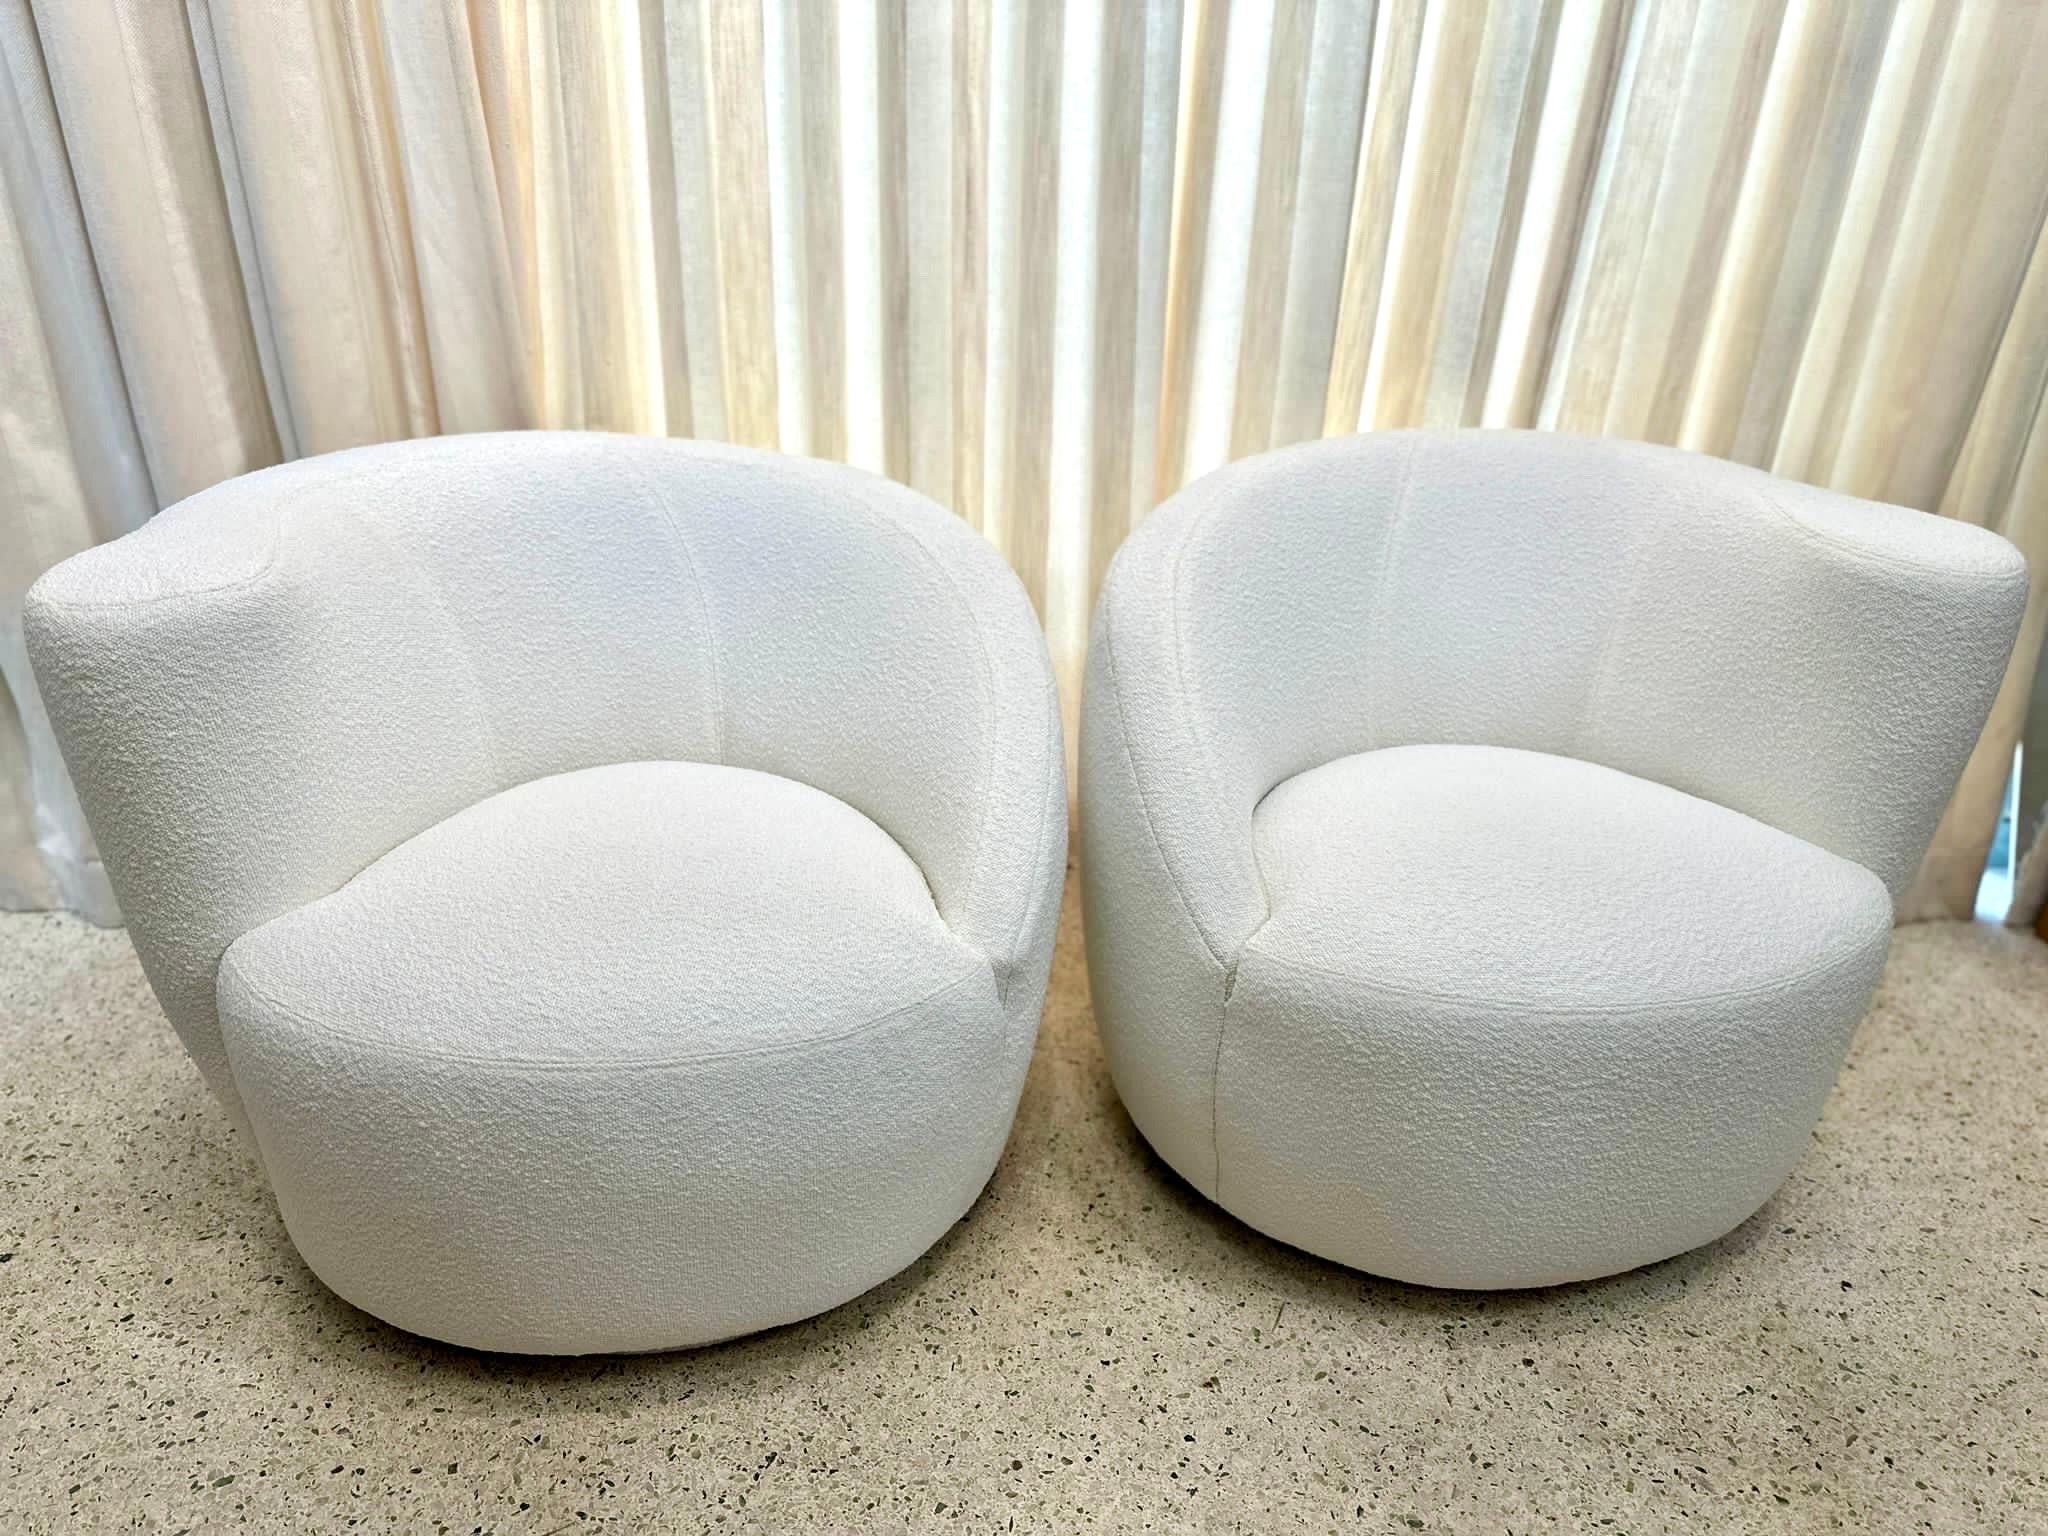 Vladimir Kagan Corkscrew Swivel Chairs for Directional in Bouclé, PAIR For Sale 3